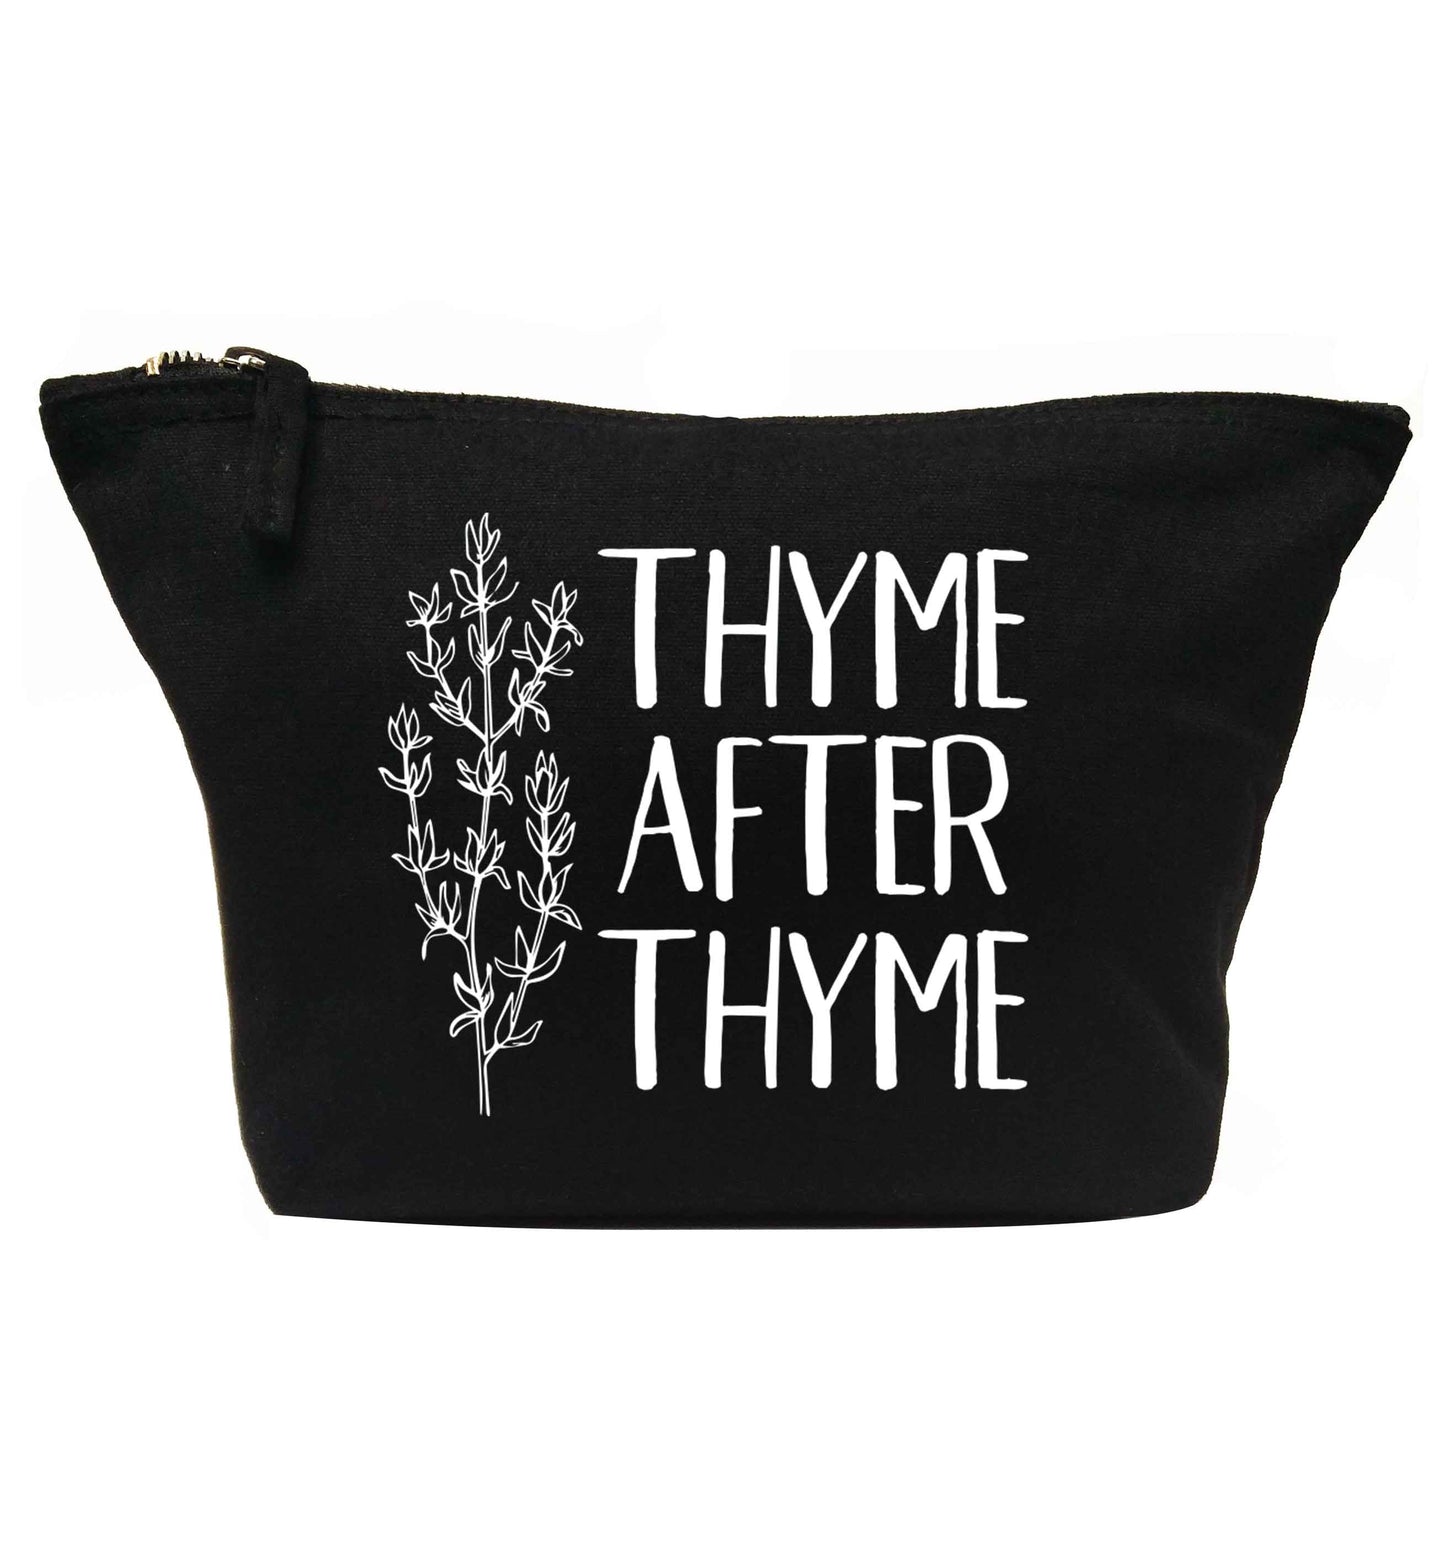 Thyme after thyme | makeup / wash bag